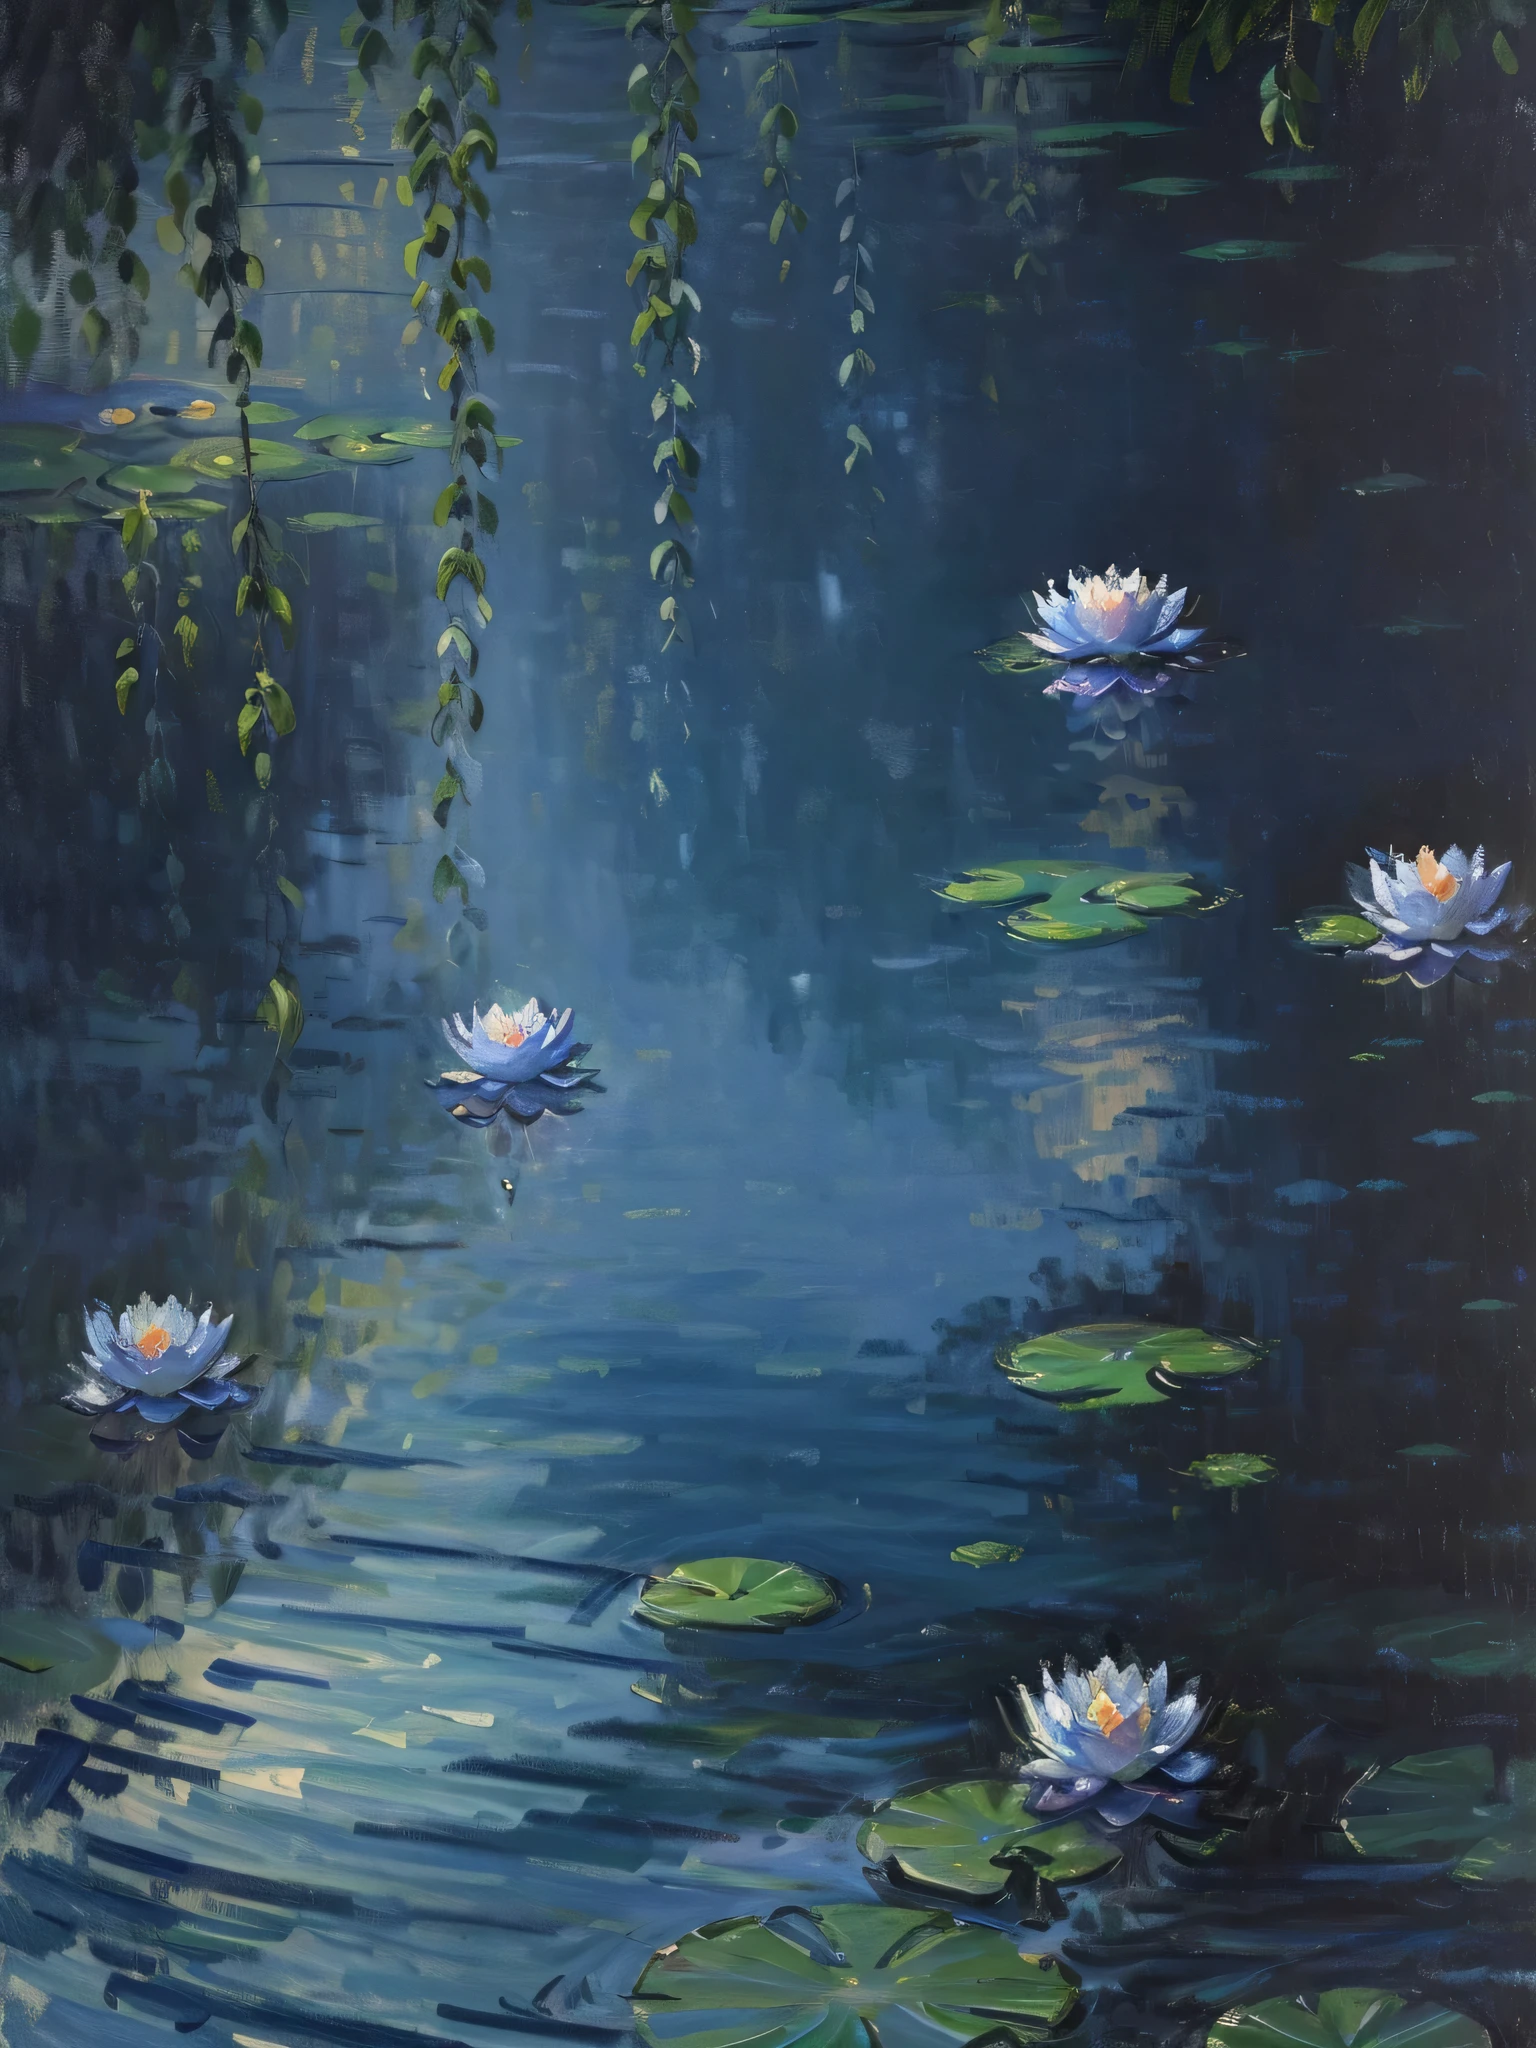 Oil painting by Monet，(best quality,4K,8k,high resolution,masterpiece:1.2),Very detailed,Practical,Beautiful moonlight lotus pond,Peaceful atmosphere,Reflected on the calm water,Lush lotus leaves,Lotus flowers blooming,Detailed water ripples,Lotus Planter Silhouette,Gentle night breeze,Quiet atmosphere,Soft moonlight illuminated the scene.,Subtle changes in light and shadow,Midnight blue and silver colors,Impressionist style,serene natural beauty,Poetic and nostalgic,Romantic atmosphere,The quiet beauty of moonlight,Dreamy and wonderful,Delicate petals under the moonlight,Graceful,Lotus flowers bloom.